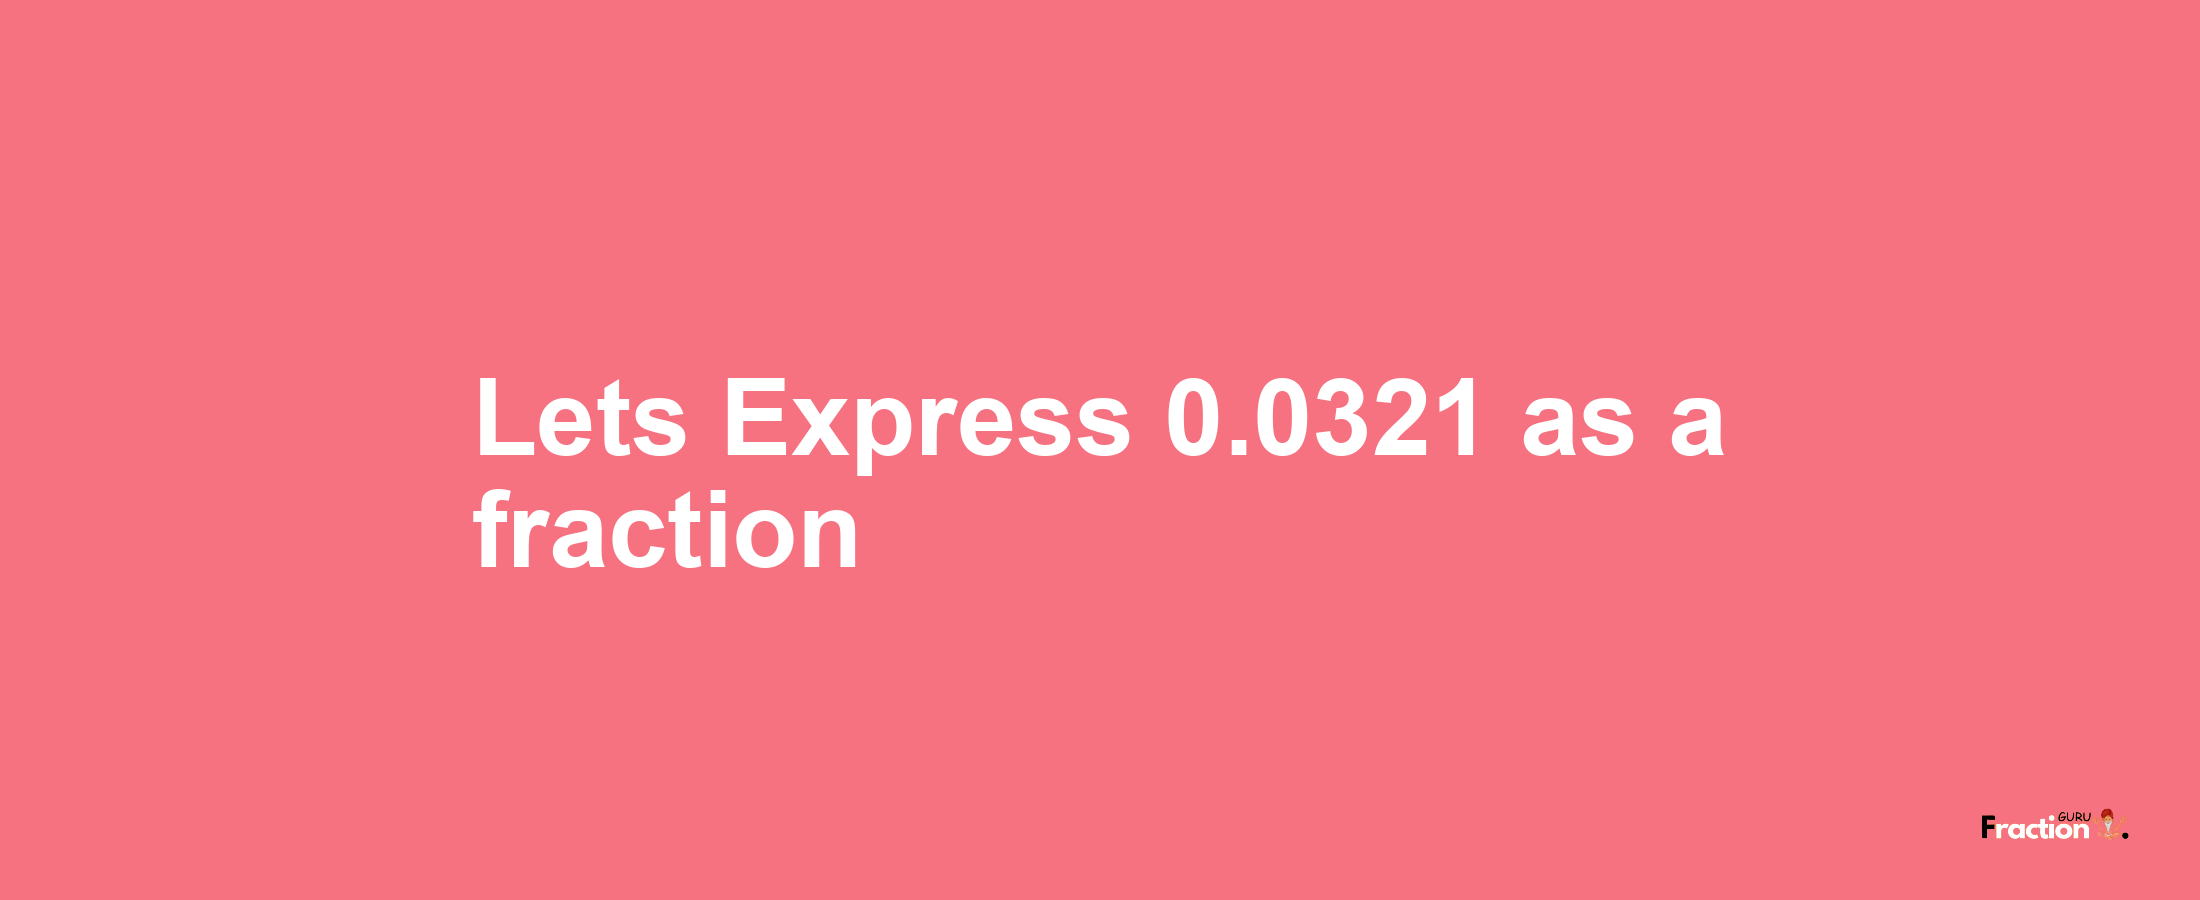 Lets Express 0.0321 as afraction